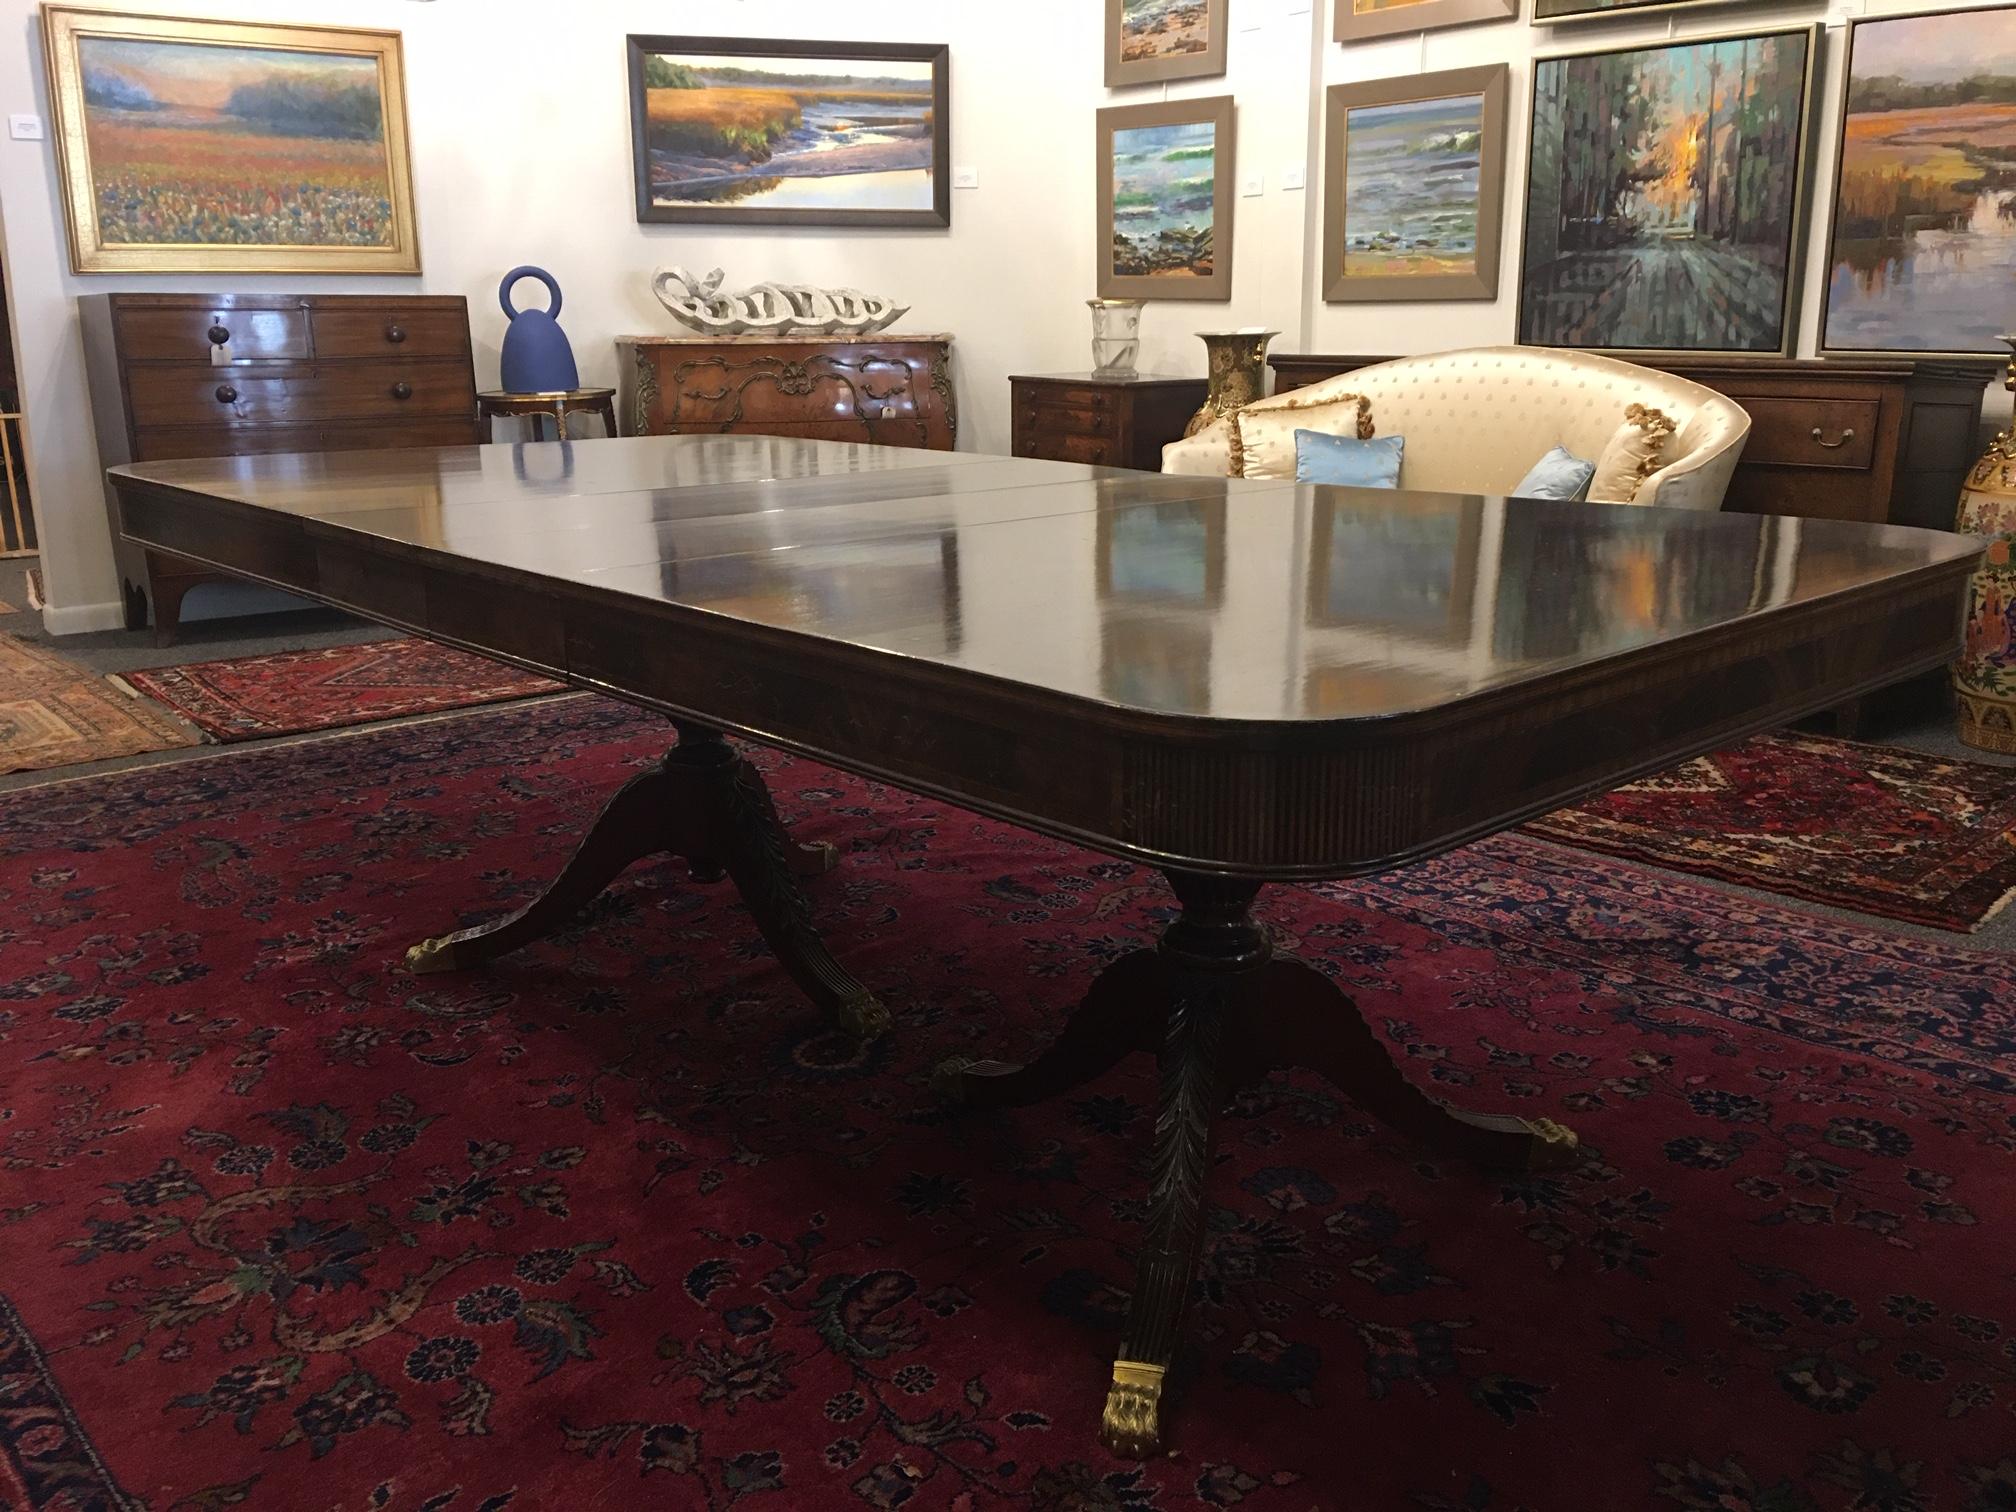 Banquet English mahogany dining room table with two pedestals and an extra support leg in the center, late 19th century. 48” W x 144” L (6 leaves each 12” W). Length of table without any leaves is 72